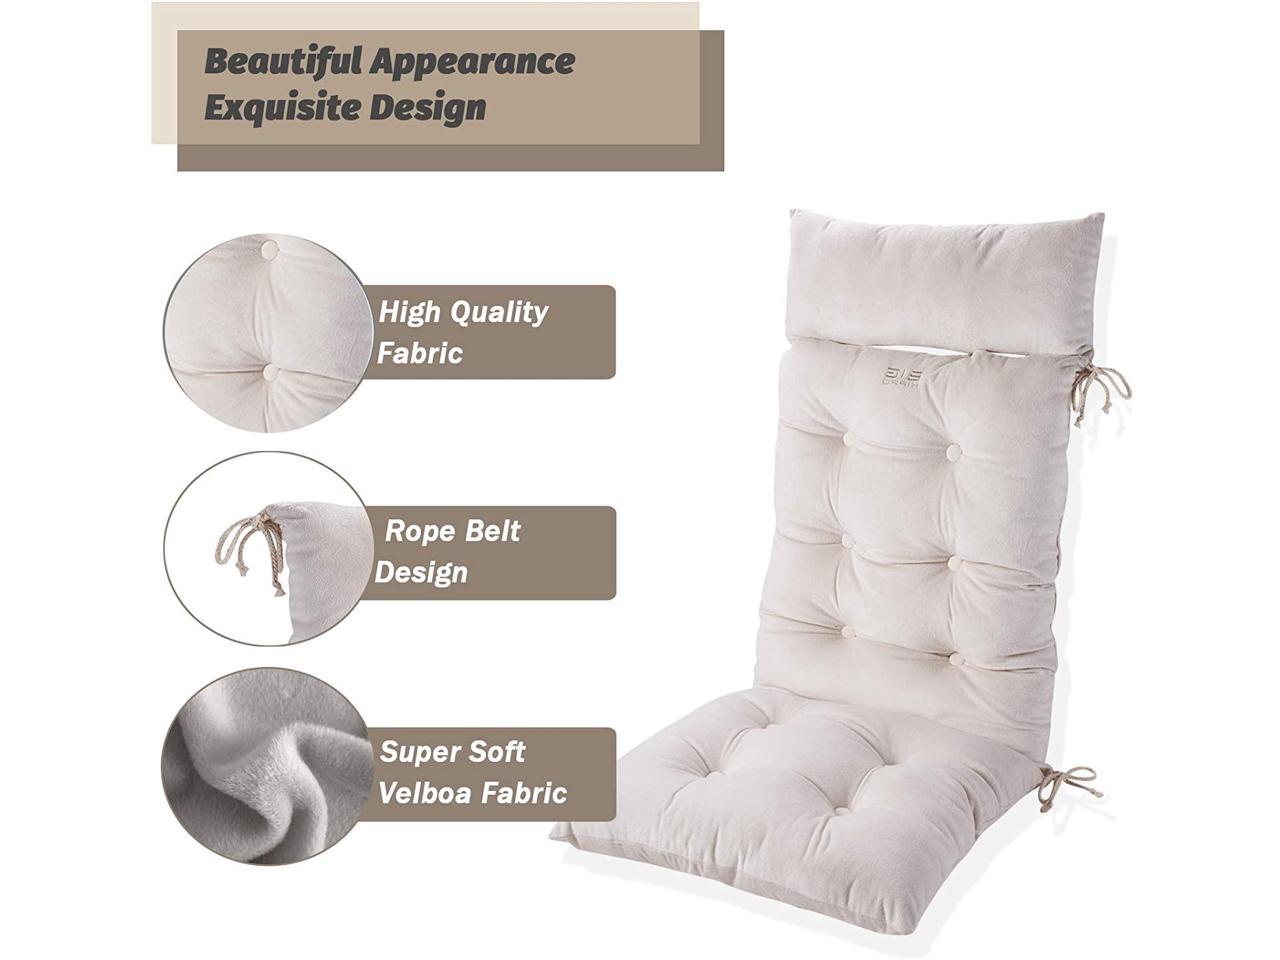 Rocking Chair Cushion Set with Detachable Neck Pillow Back Support